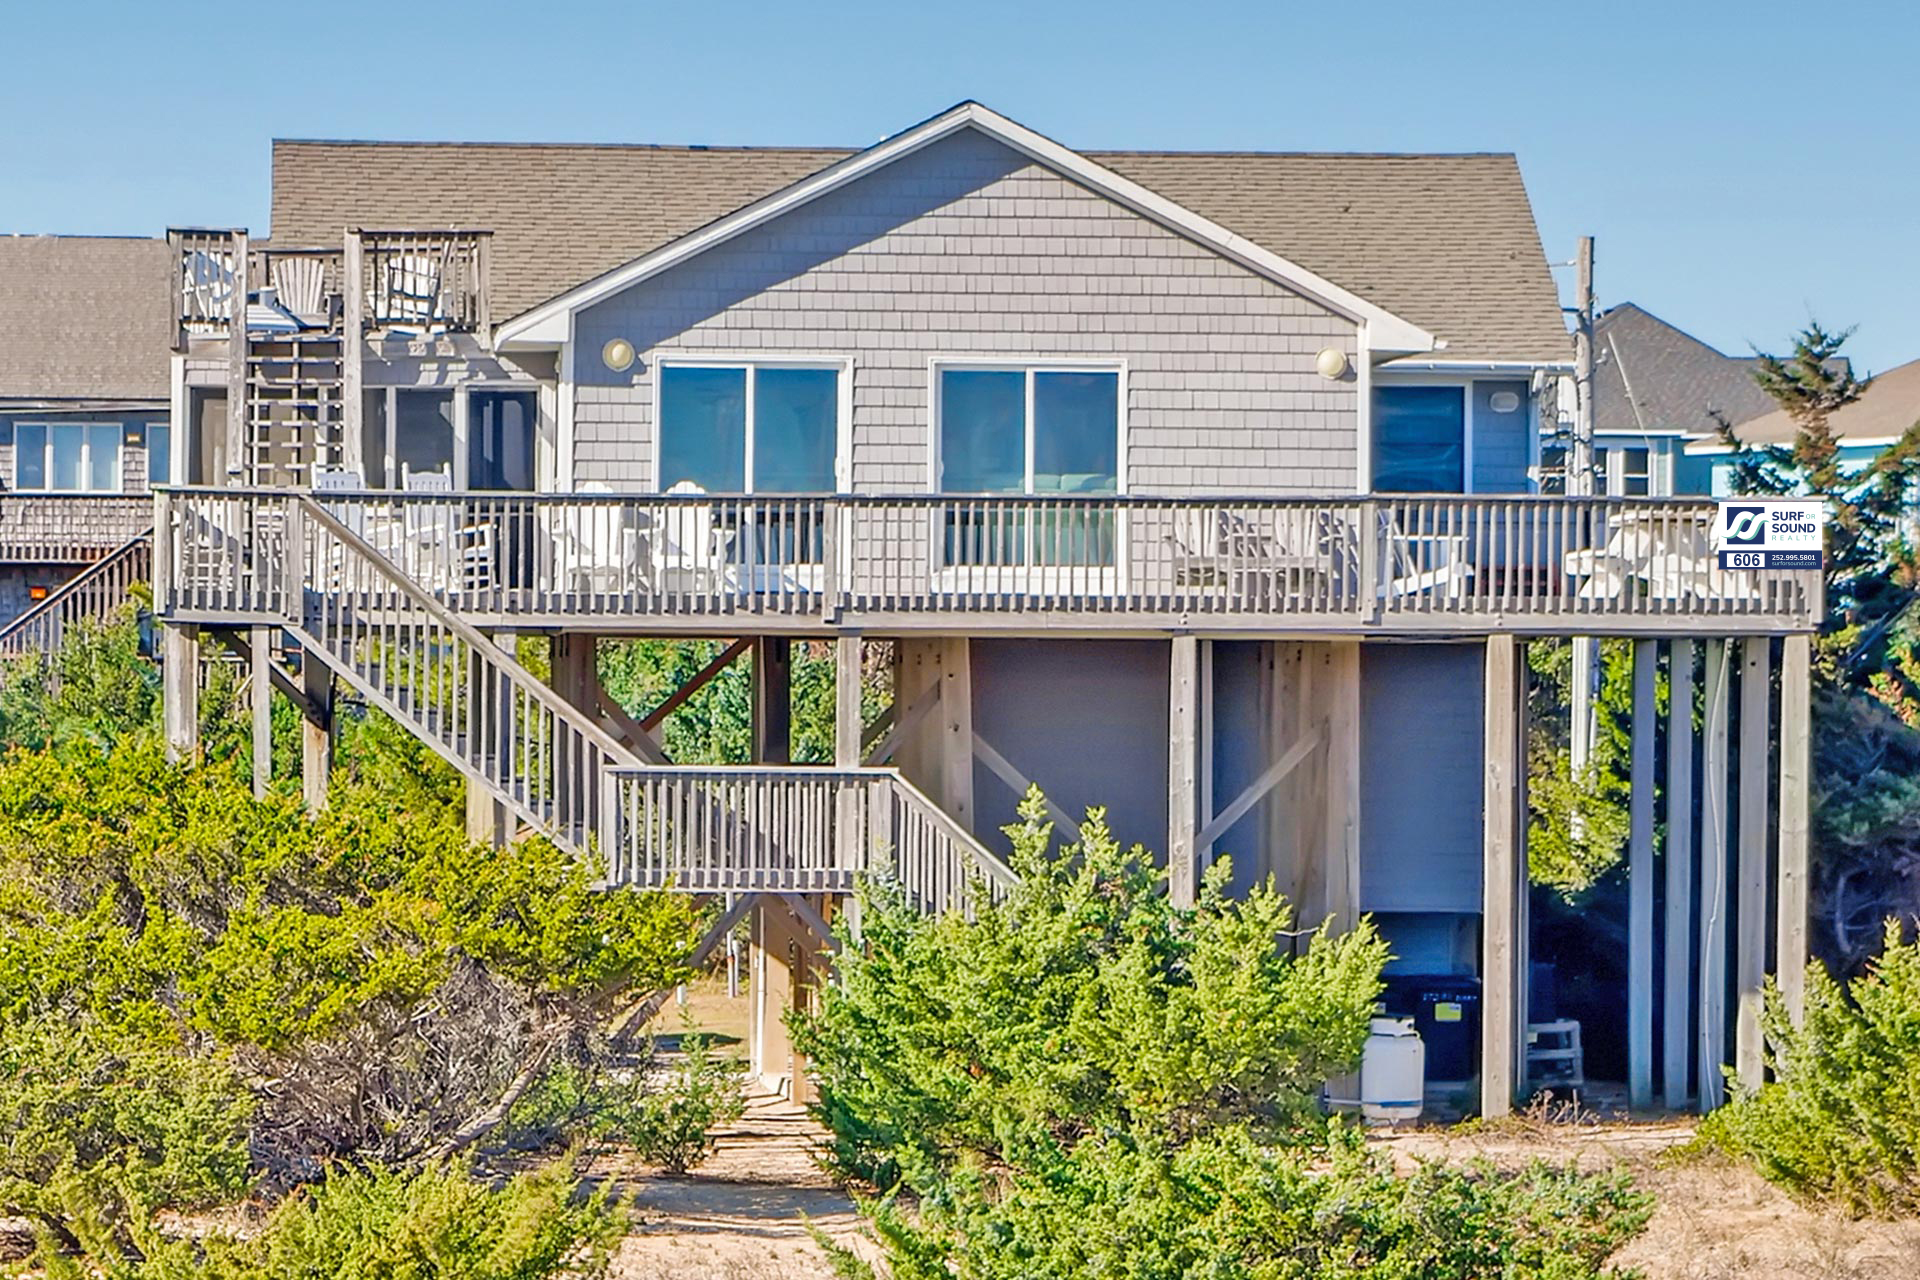 Sandpiper Cove - Vacation Rental in Surf City,NC